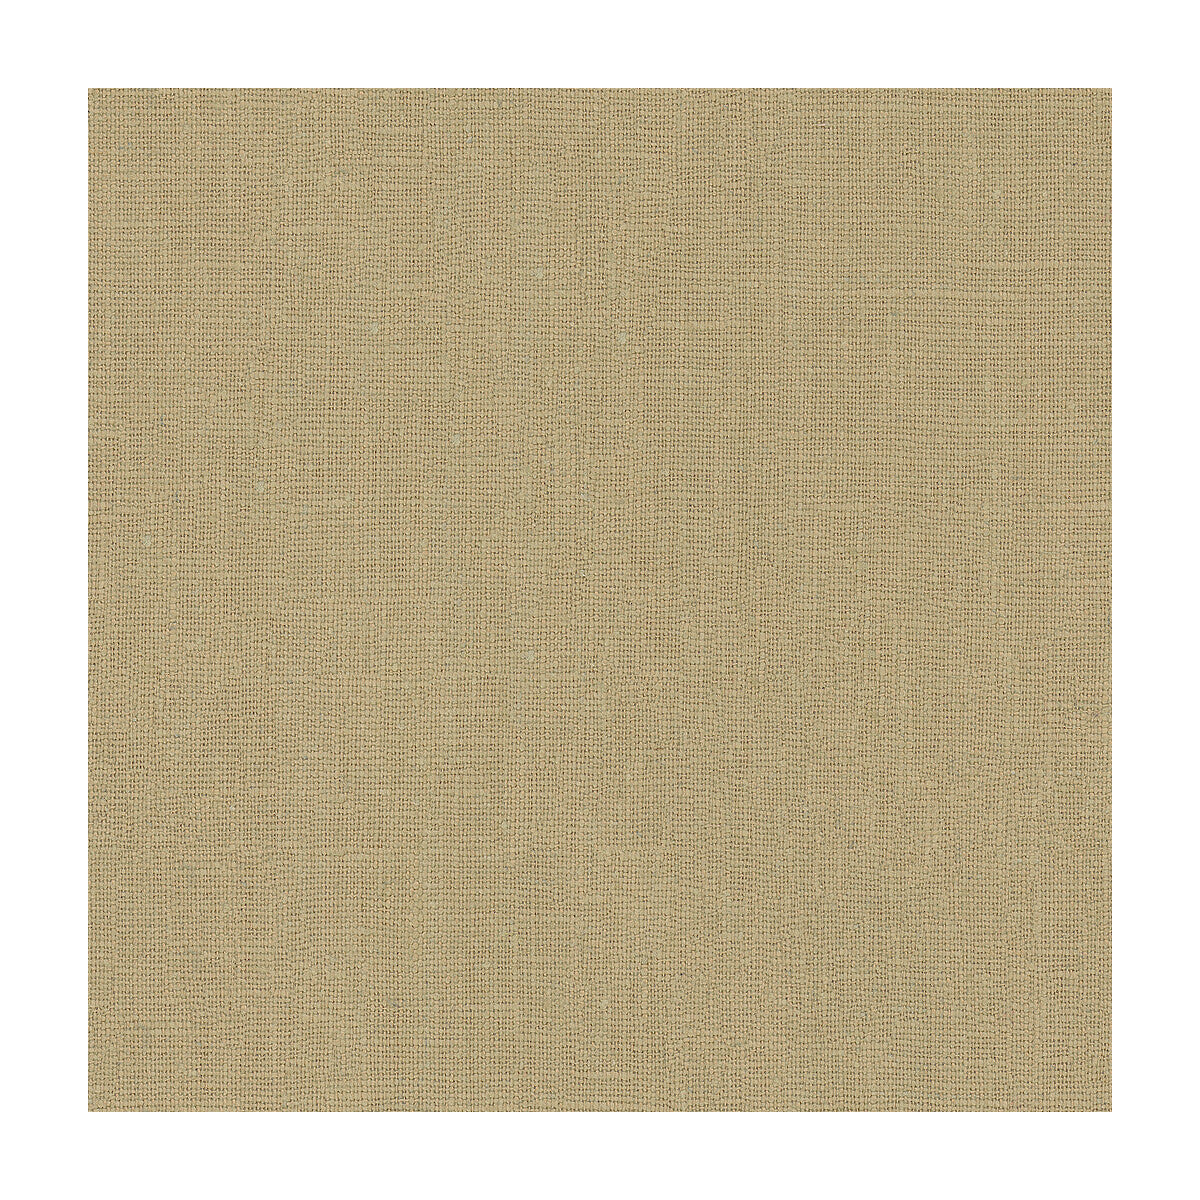 Kravet Basics fabric in 32344-1601 color - pattern 32344.1601.0 - by Kravet Basics in the Perfect Plains collection